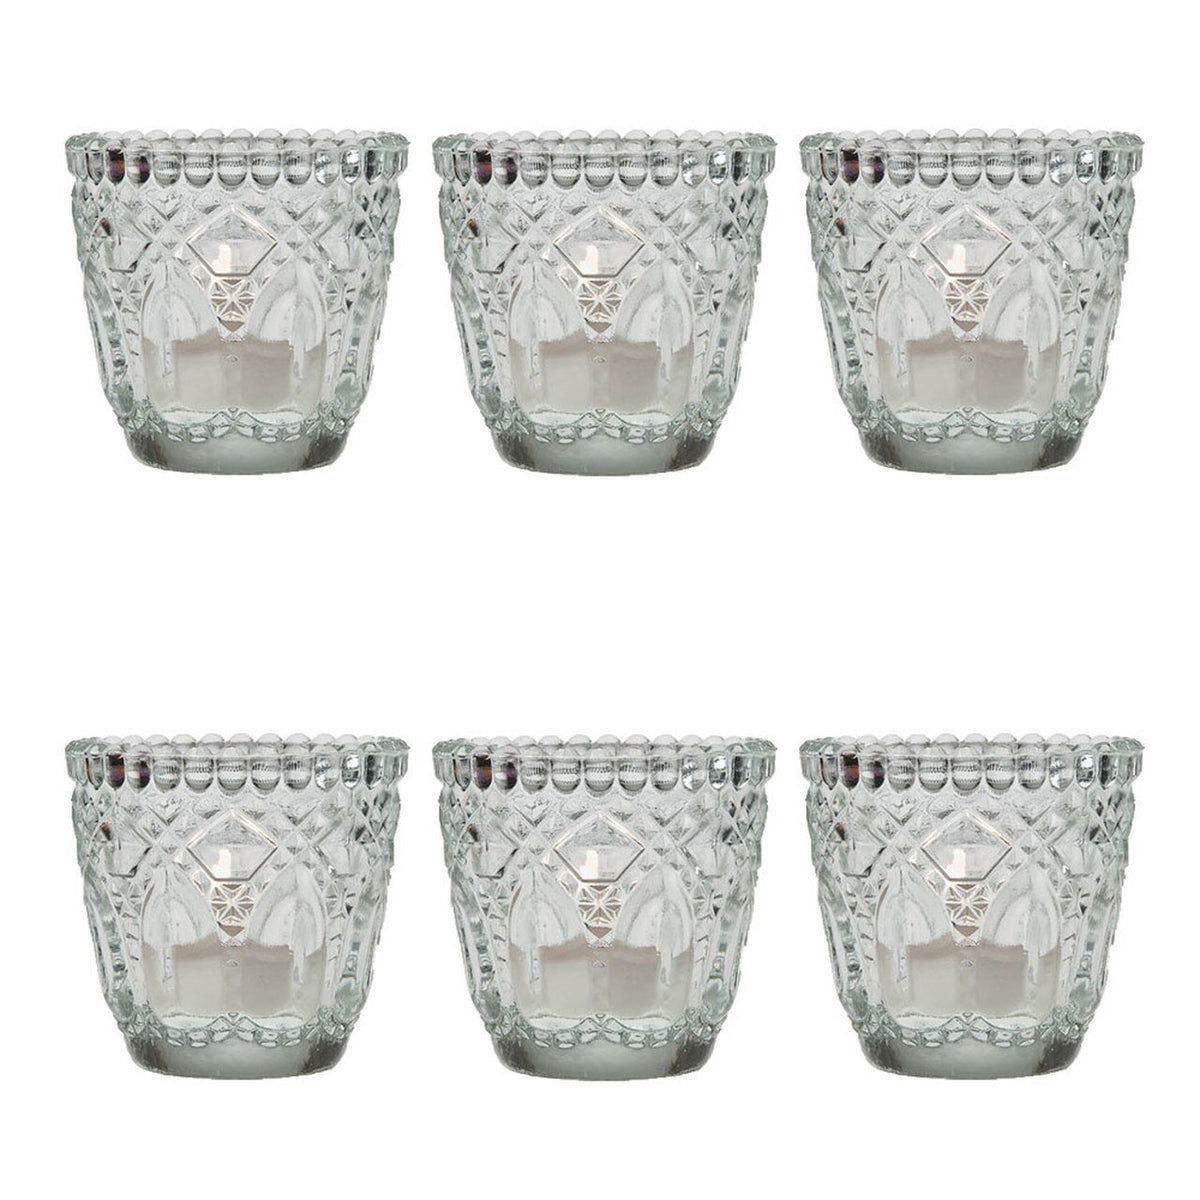 6 Pack | Faceted Vintage Glass Candle Holders (2.75-Inch, Lillian Design, Clear) - Use with Tea Lights - For Home Decor, Parties and Wedding Decorations - AsianImportStore.com - B2B Wholesale Lighting & Decor since 2002